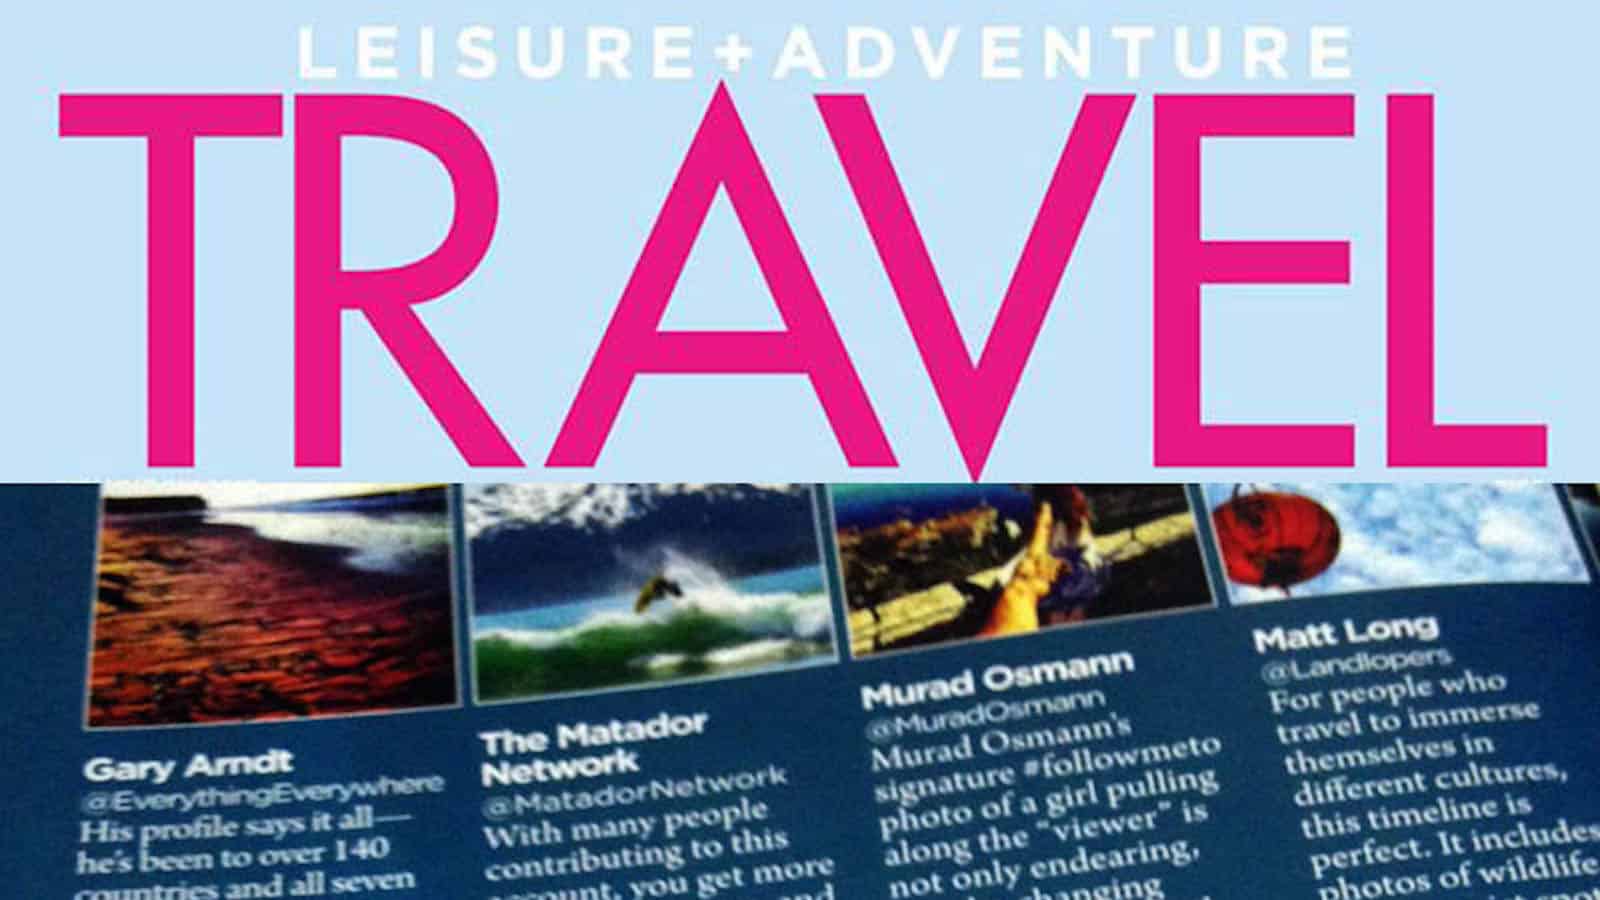 10 Accounts to Follow Online (Leisure + Adventure TRAVEL Magazine Feature)